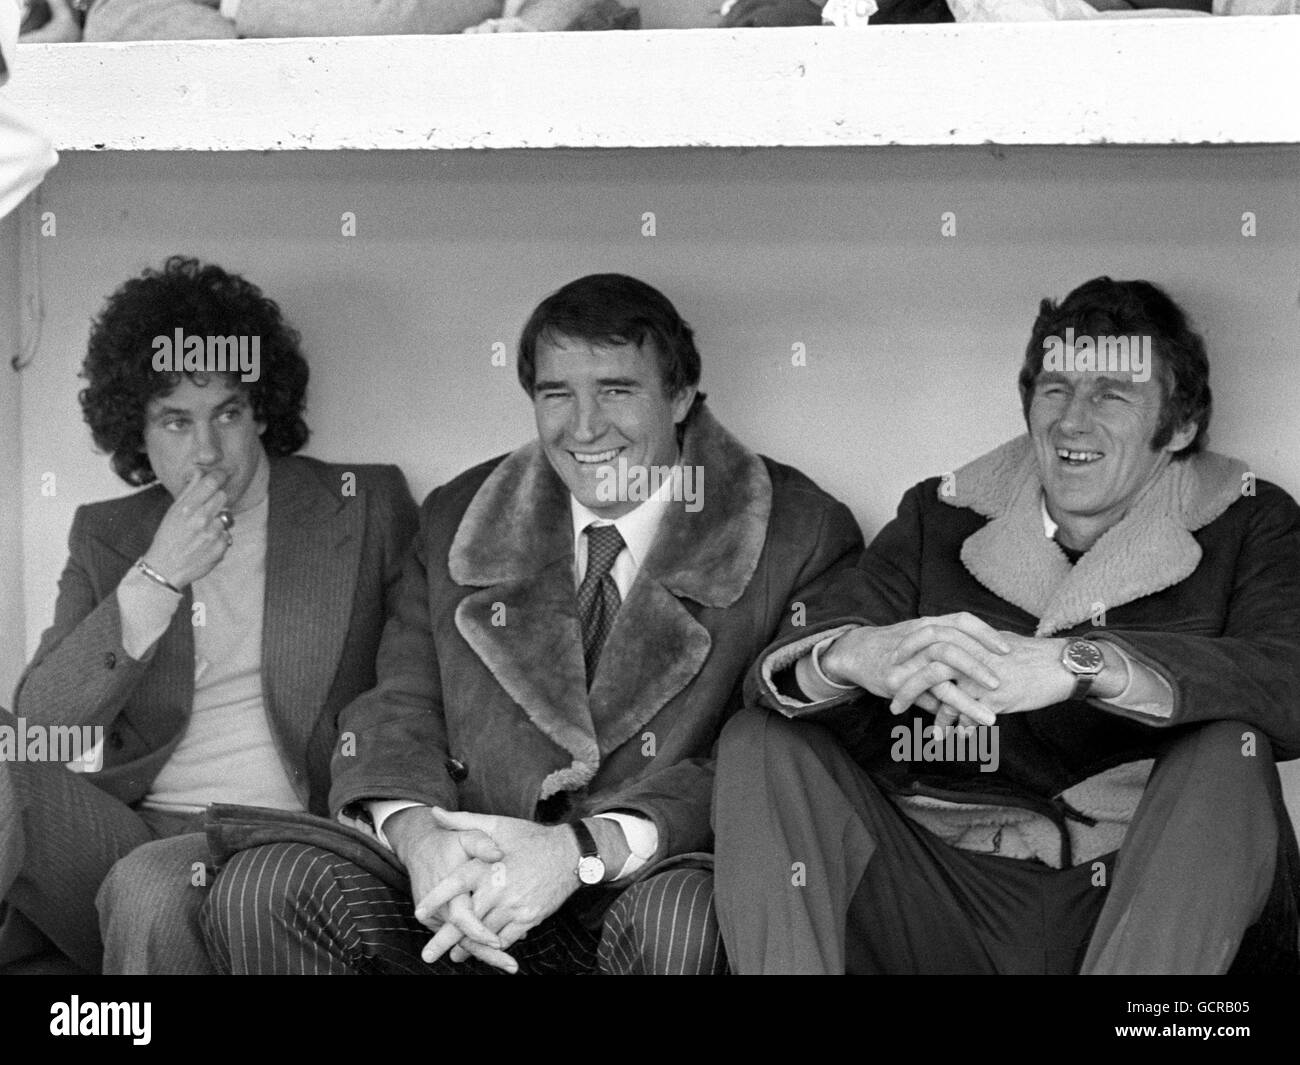 Soccer - League Division One - Tottenham Hotspur v Manchester City - White Hart Lane. Malcolm Allison, assistant manager of Manchester City, centre, with manager Tony Book, right, looking pleased as City beat Spurs 3-0. Stock Photo